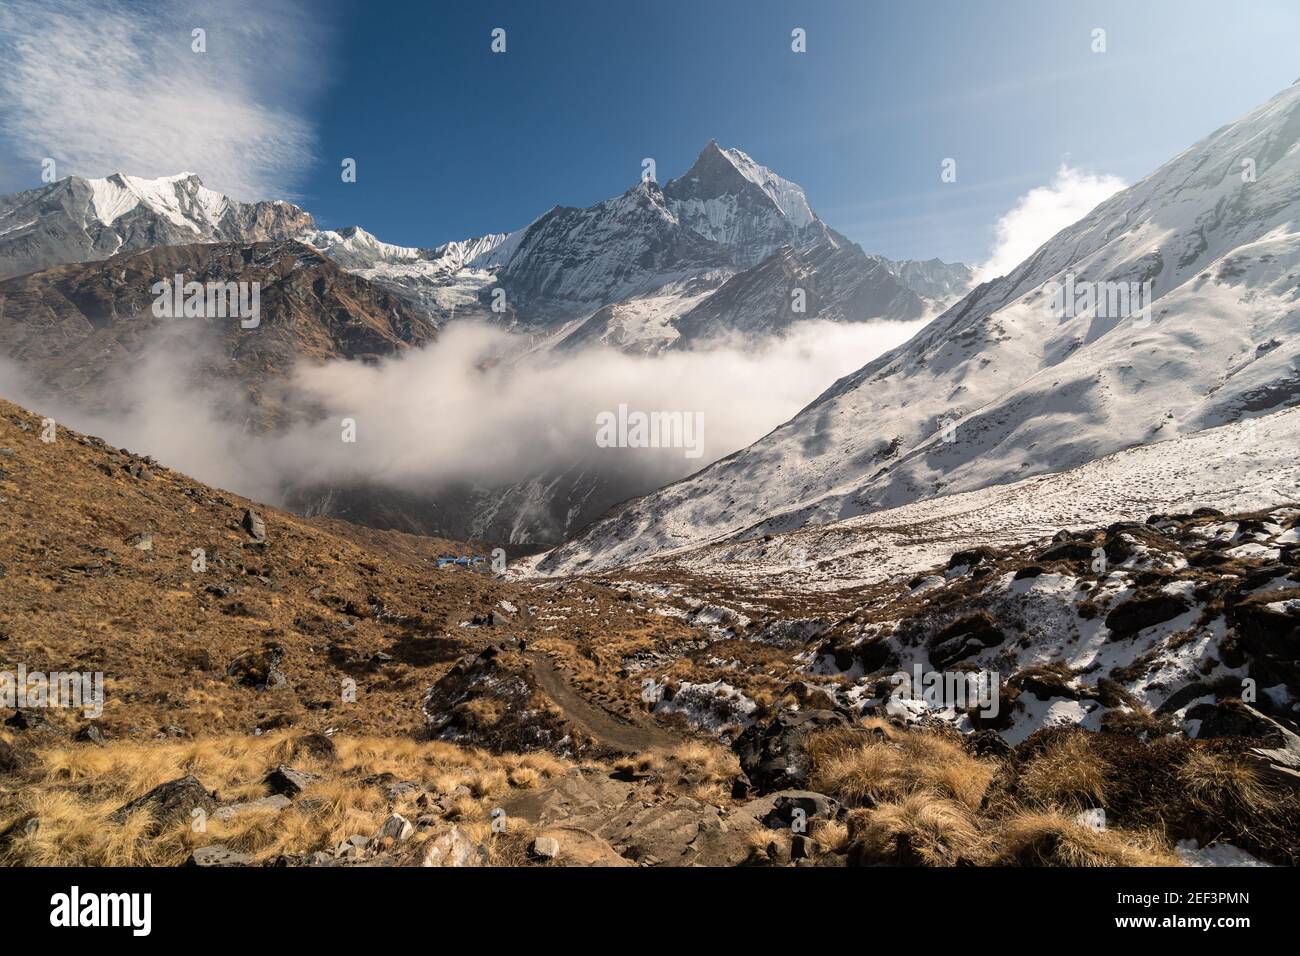 Dramatic view of the Machapuchare peak, also called fishtail mountain, in the Annapurna region in the Himalayas in Nepal Stock Photo